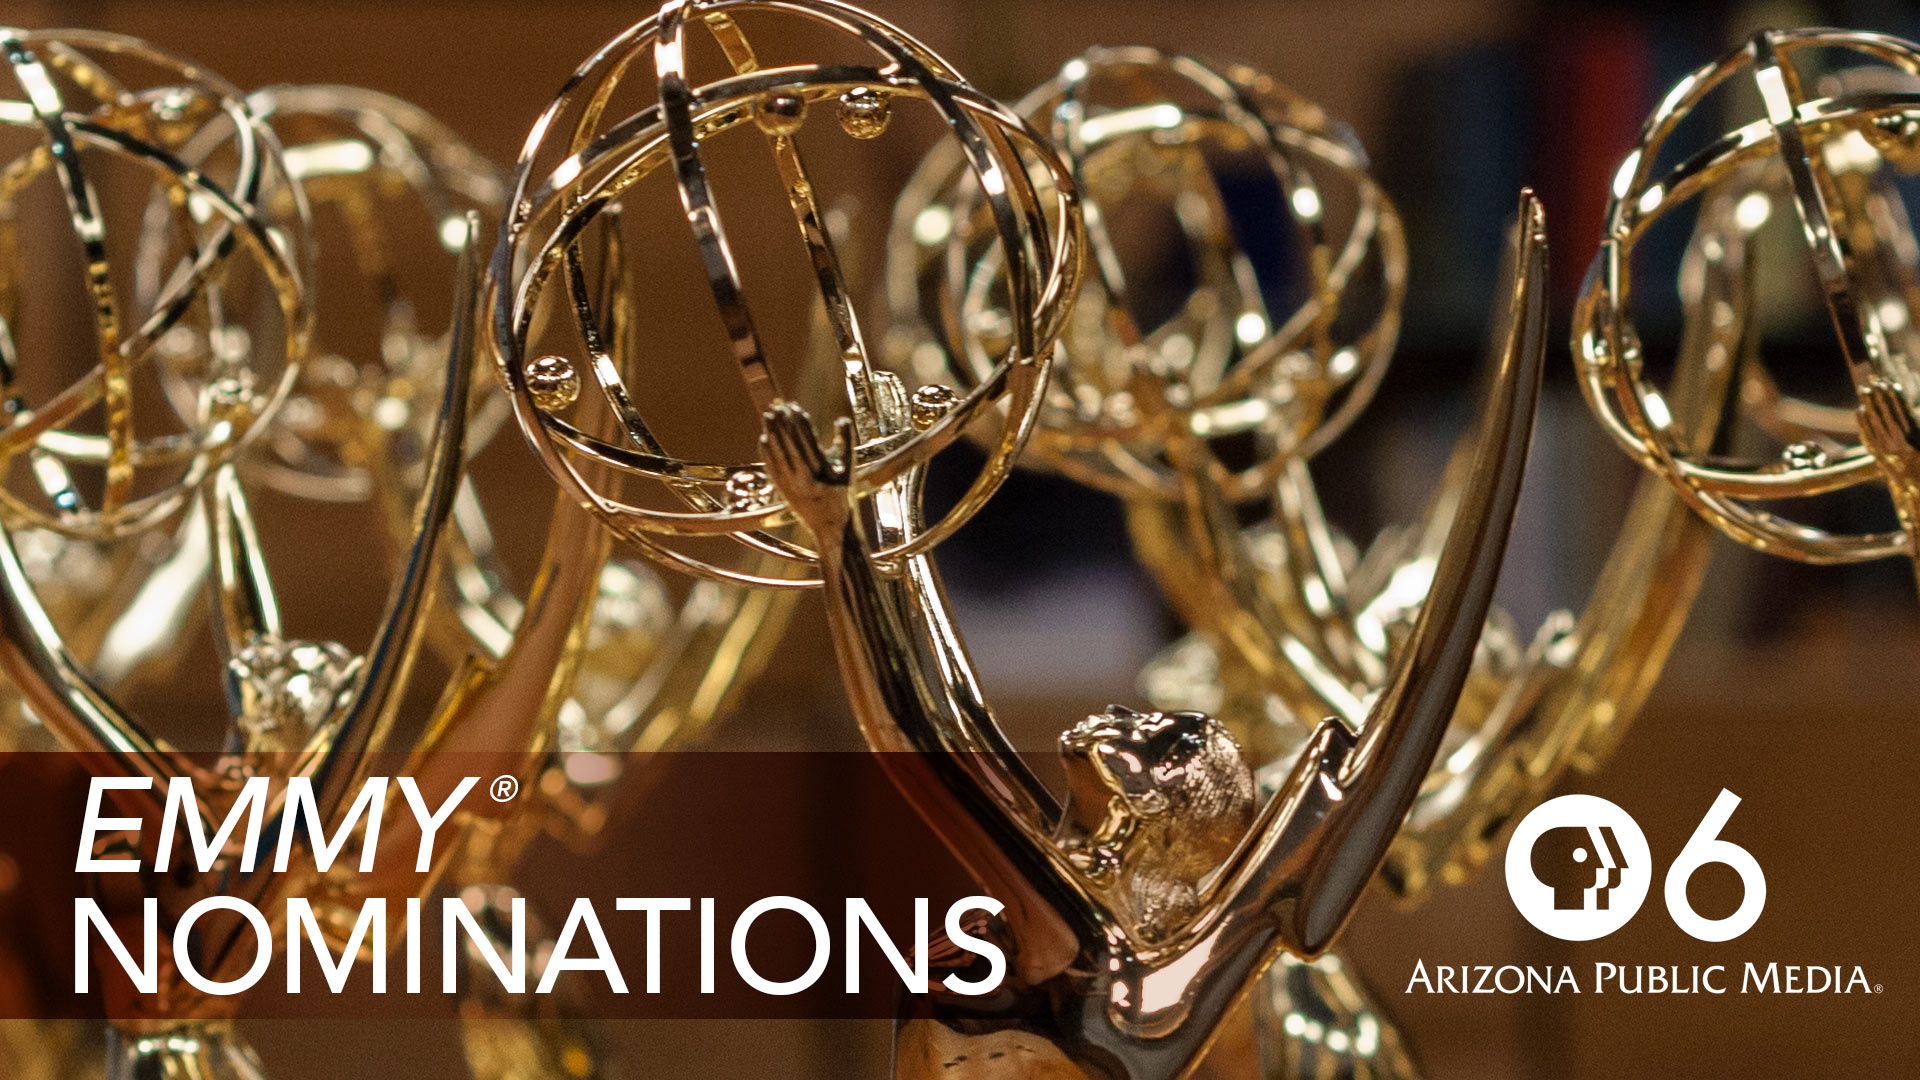 In 2022, AZPM staff earned 39 individual nominations for 16 projects across 12 categories, more than any other public media broadcaster in the region.